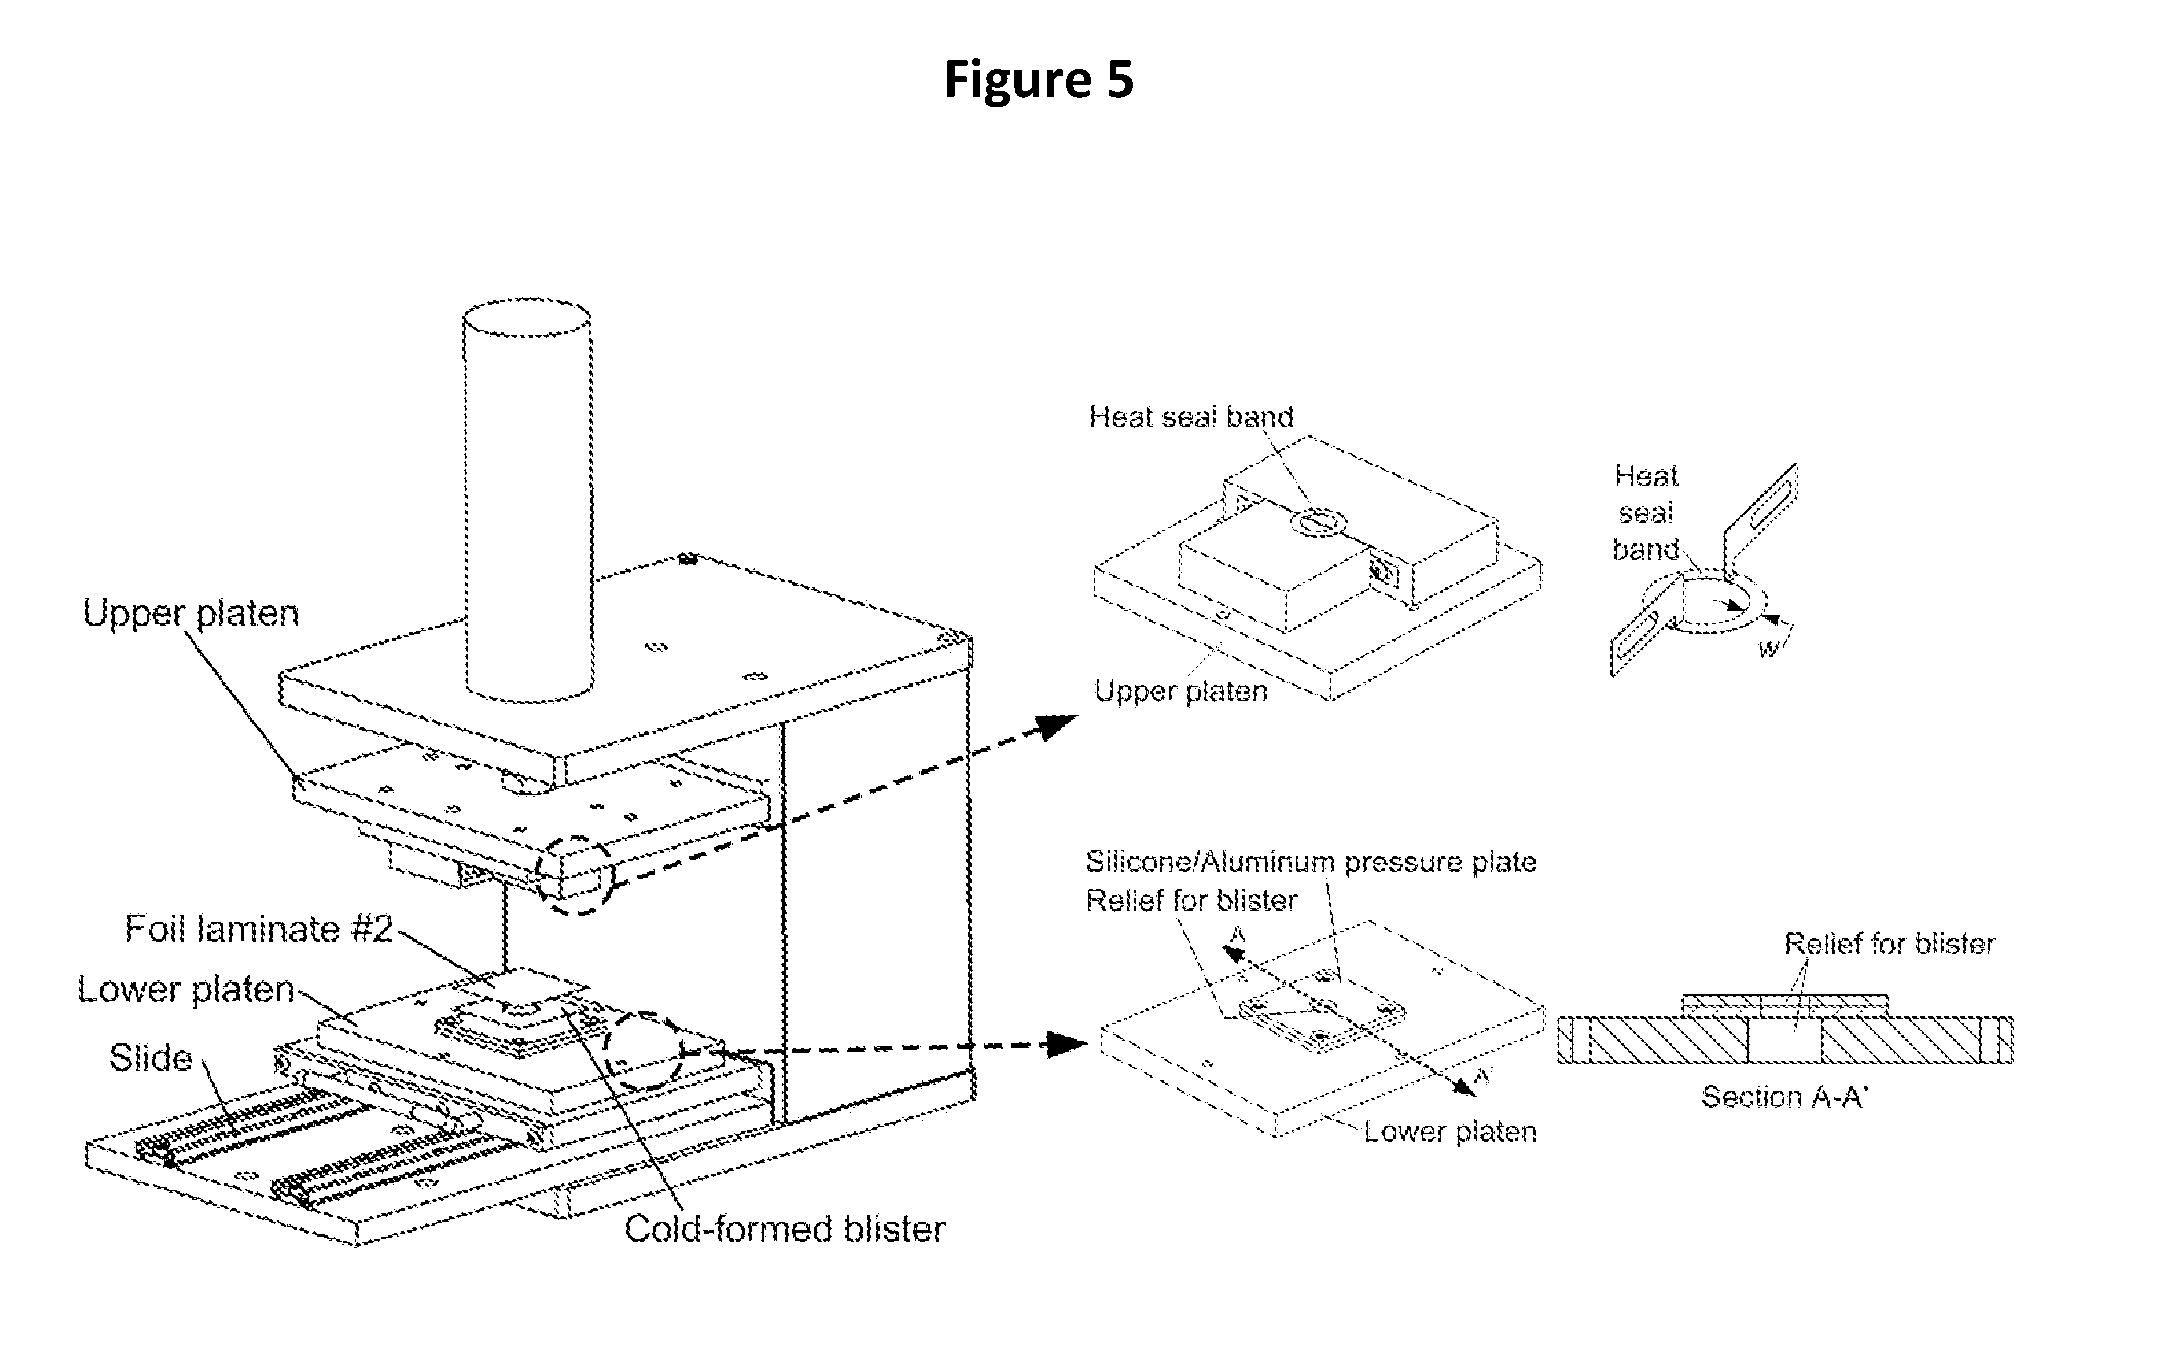 Burstable liquid packaging and uses thereof